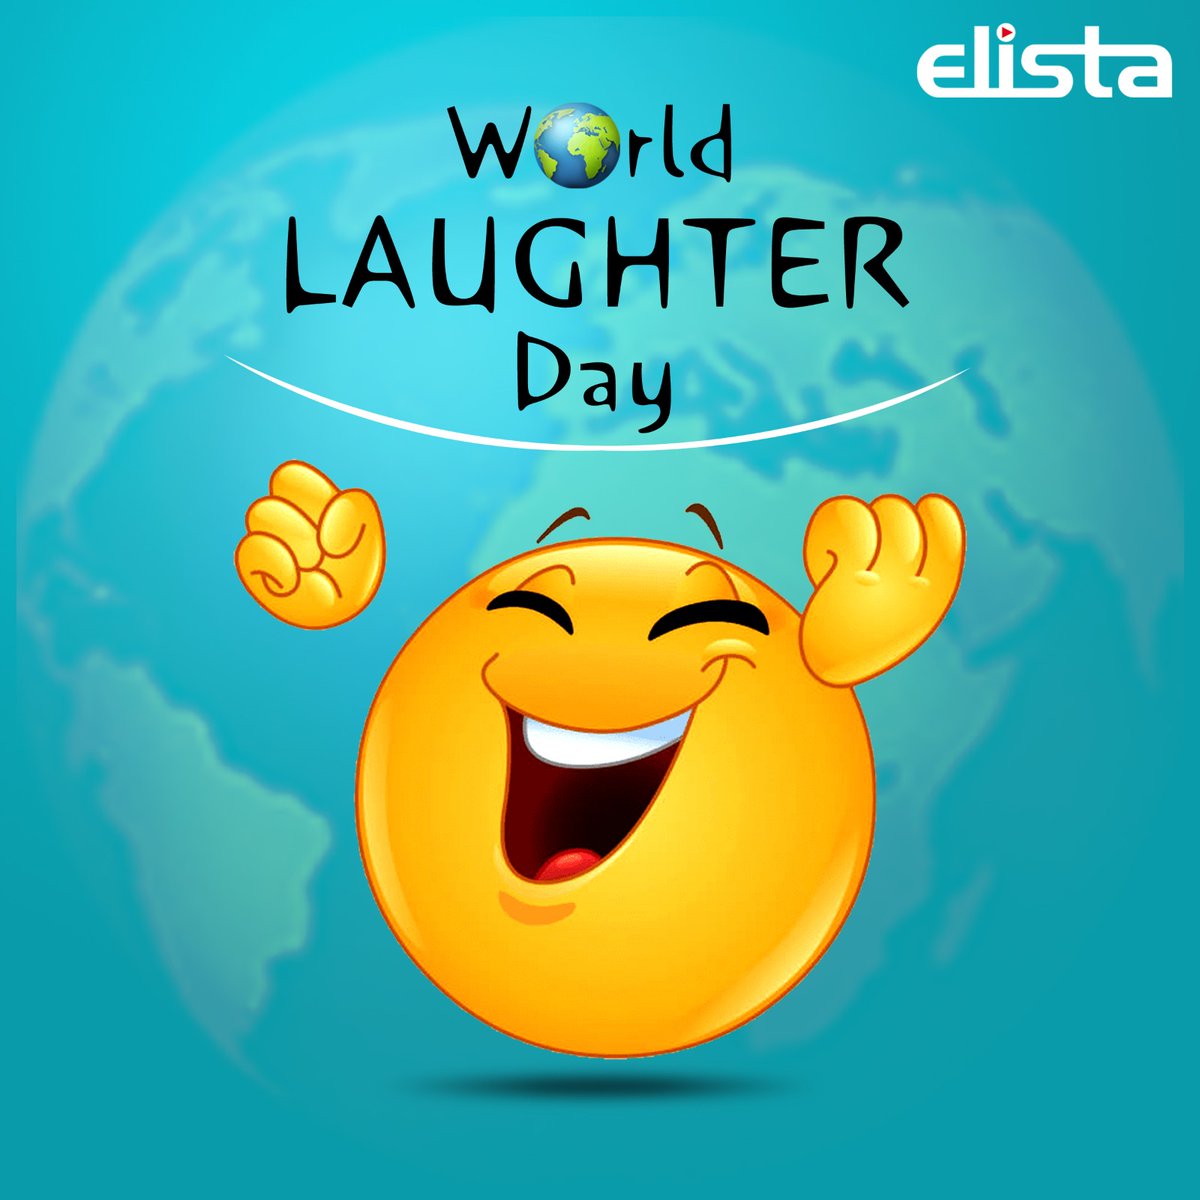 Let's spread joy and laughter on World Laughter Day! Remember, a smile is contagious. 😄 #WorldLaughterDay #SpreadJoy